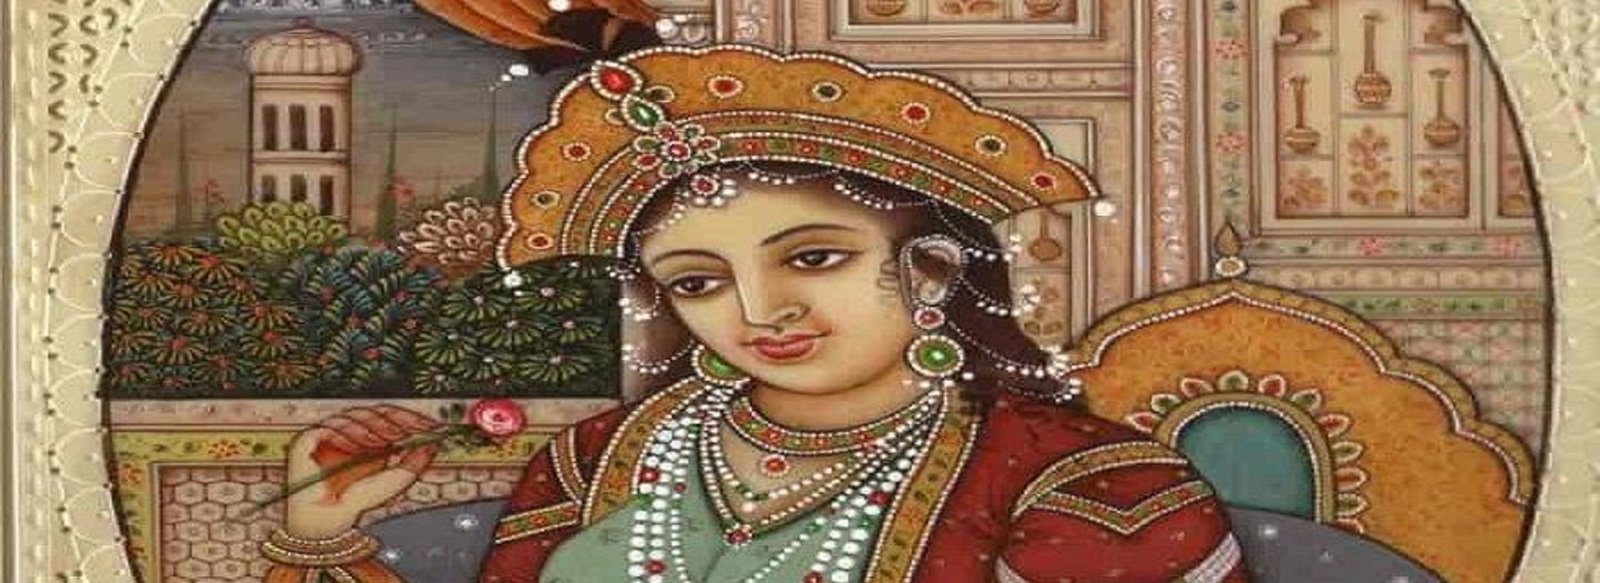 Shahjahan Mumtaz Mahal Story of Love and Tragedy